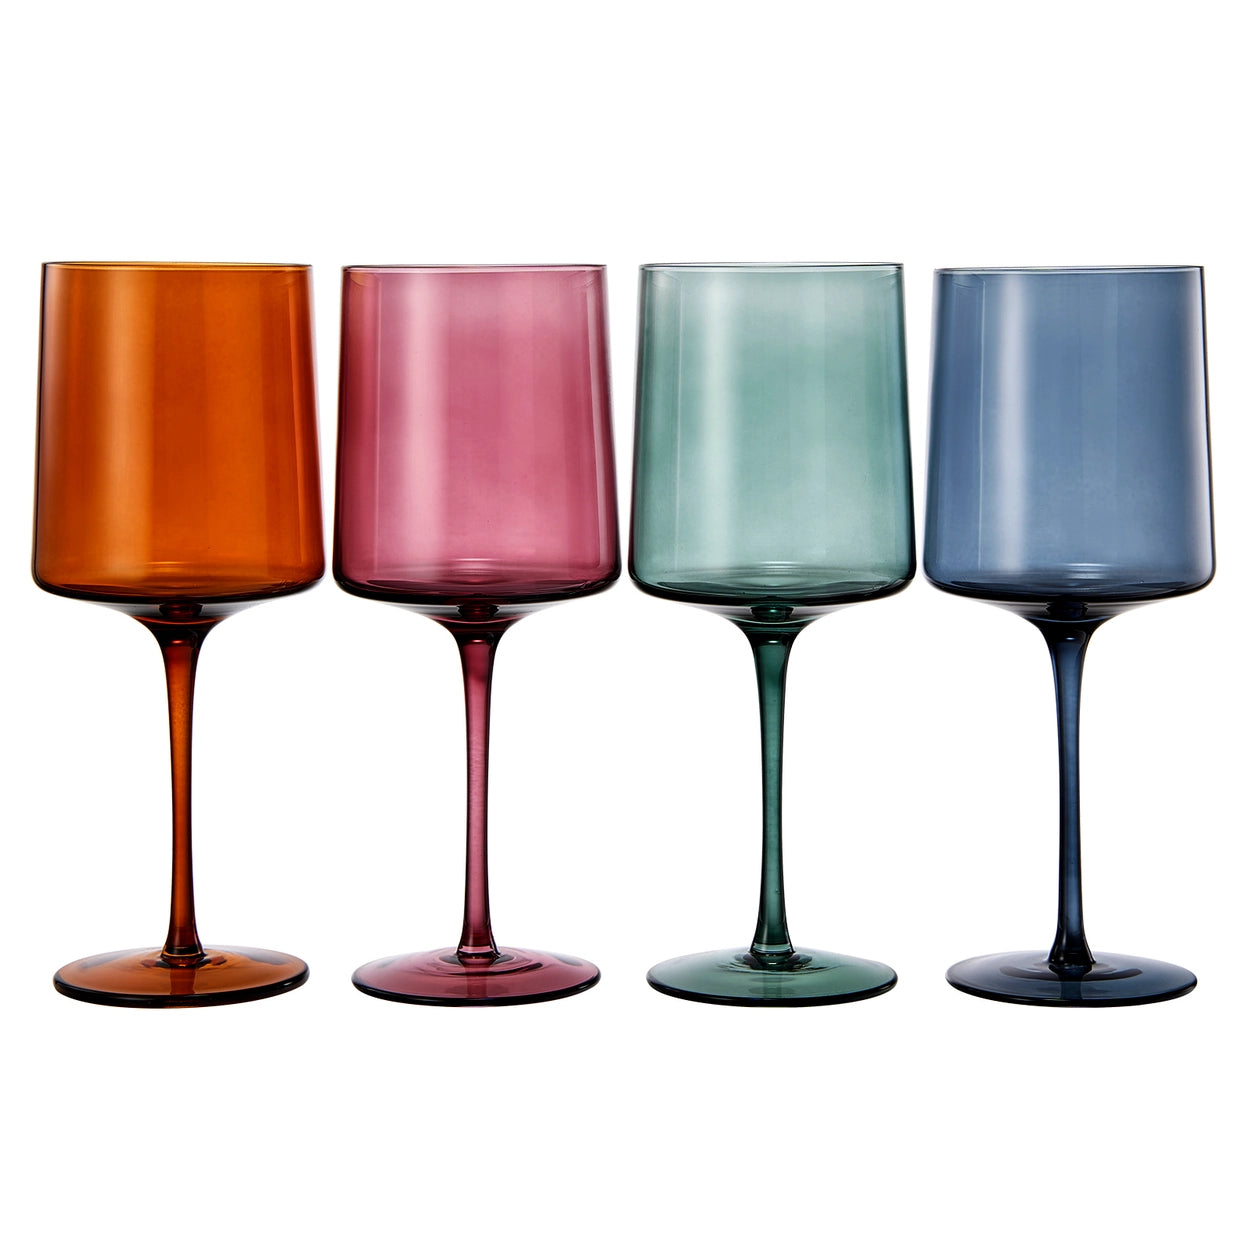 May Flowers Colored Square Wine Glasses - Set of 4